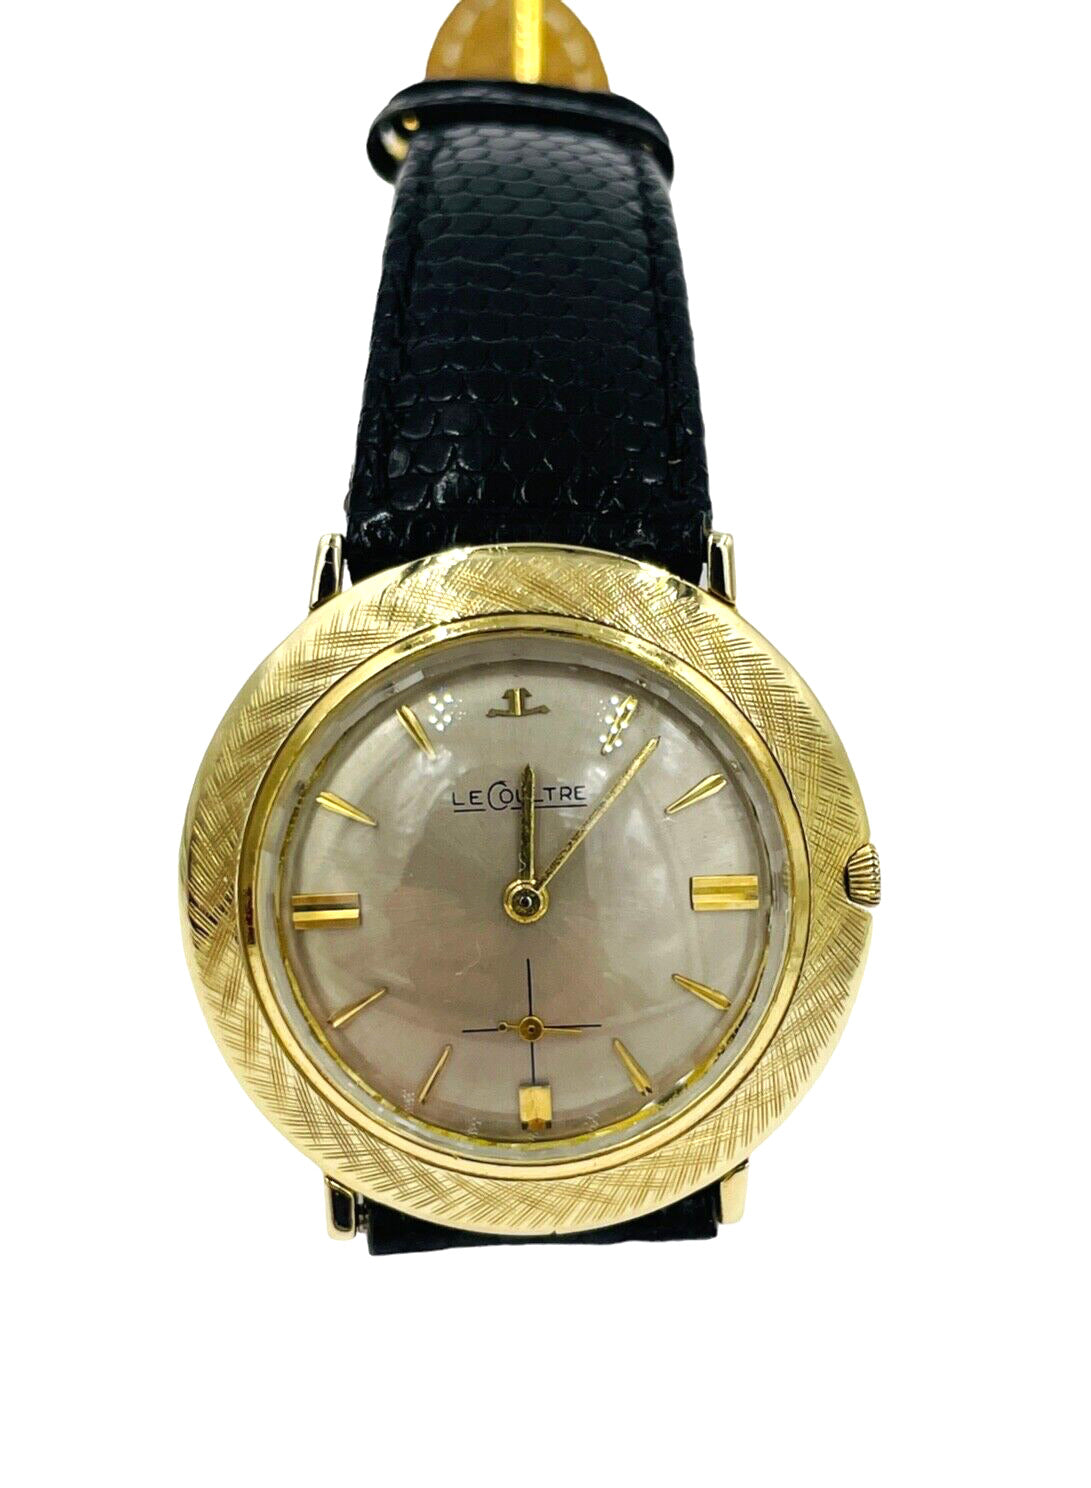 Vintage Jeager LeCoultre 14k yellow gold Manual wind movement 33mm Men's watch